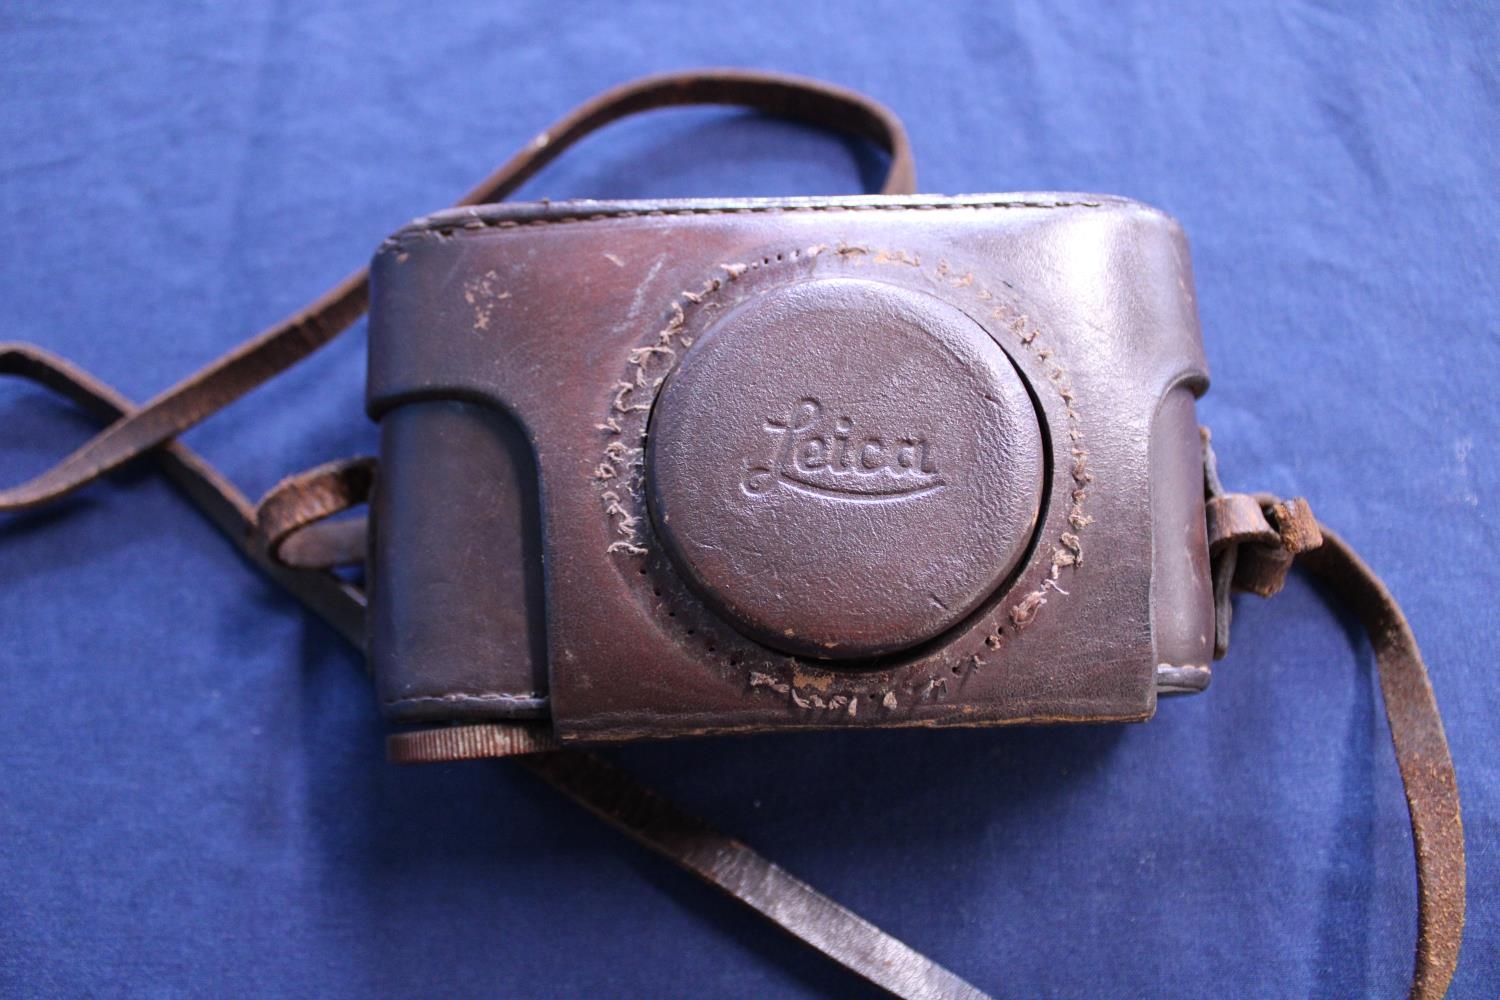 A reproduction Leitz Elmar 1:35 f=50mm camera (sold as seen) - Image 5 of 5